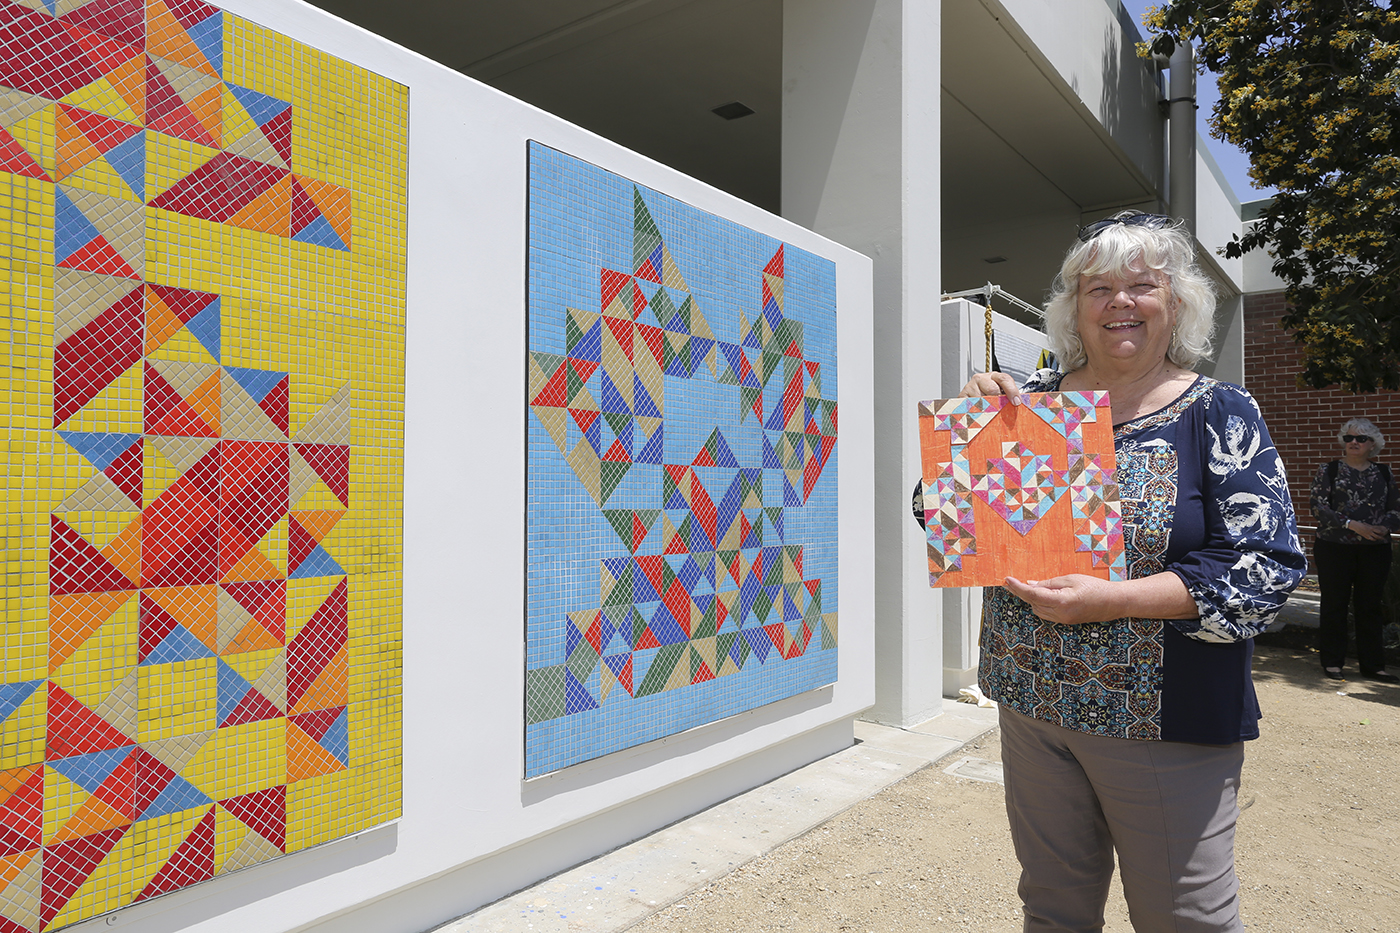 Woman standing in front of artwork at the 2019 Culturama event.